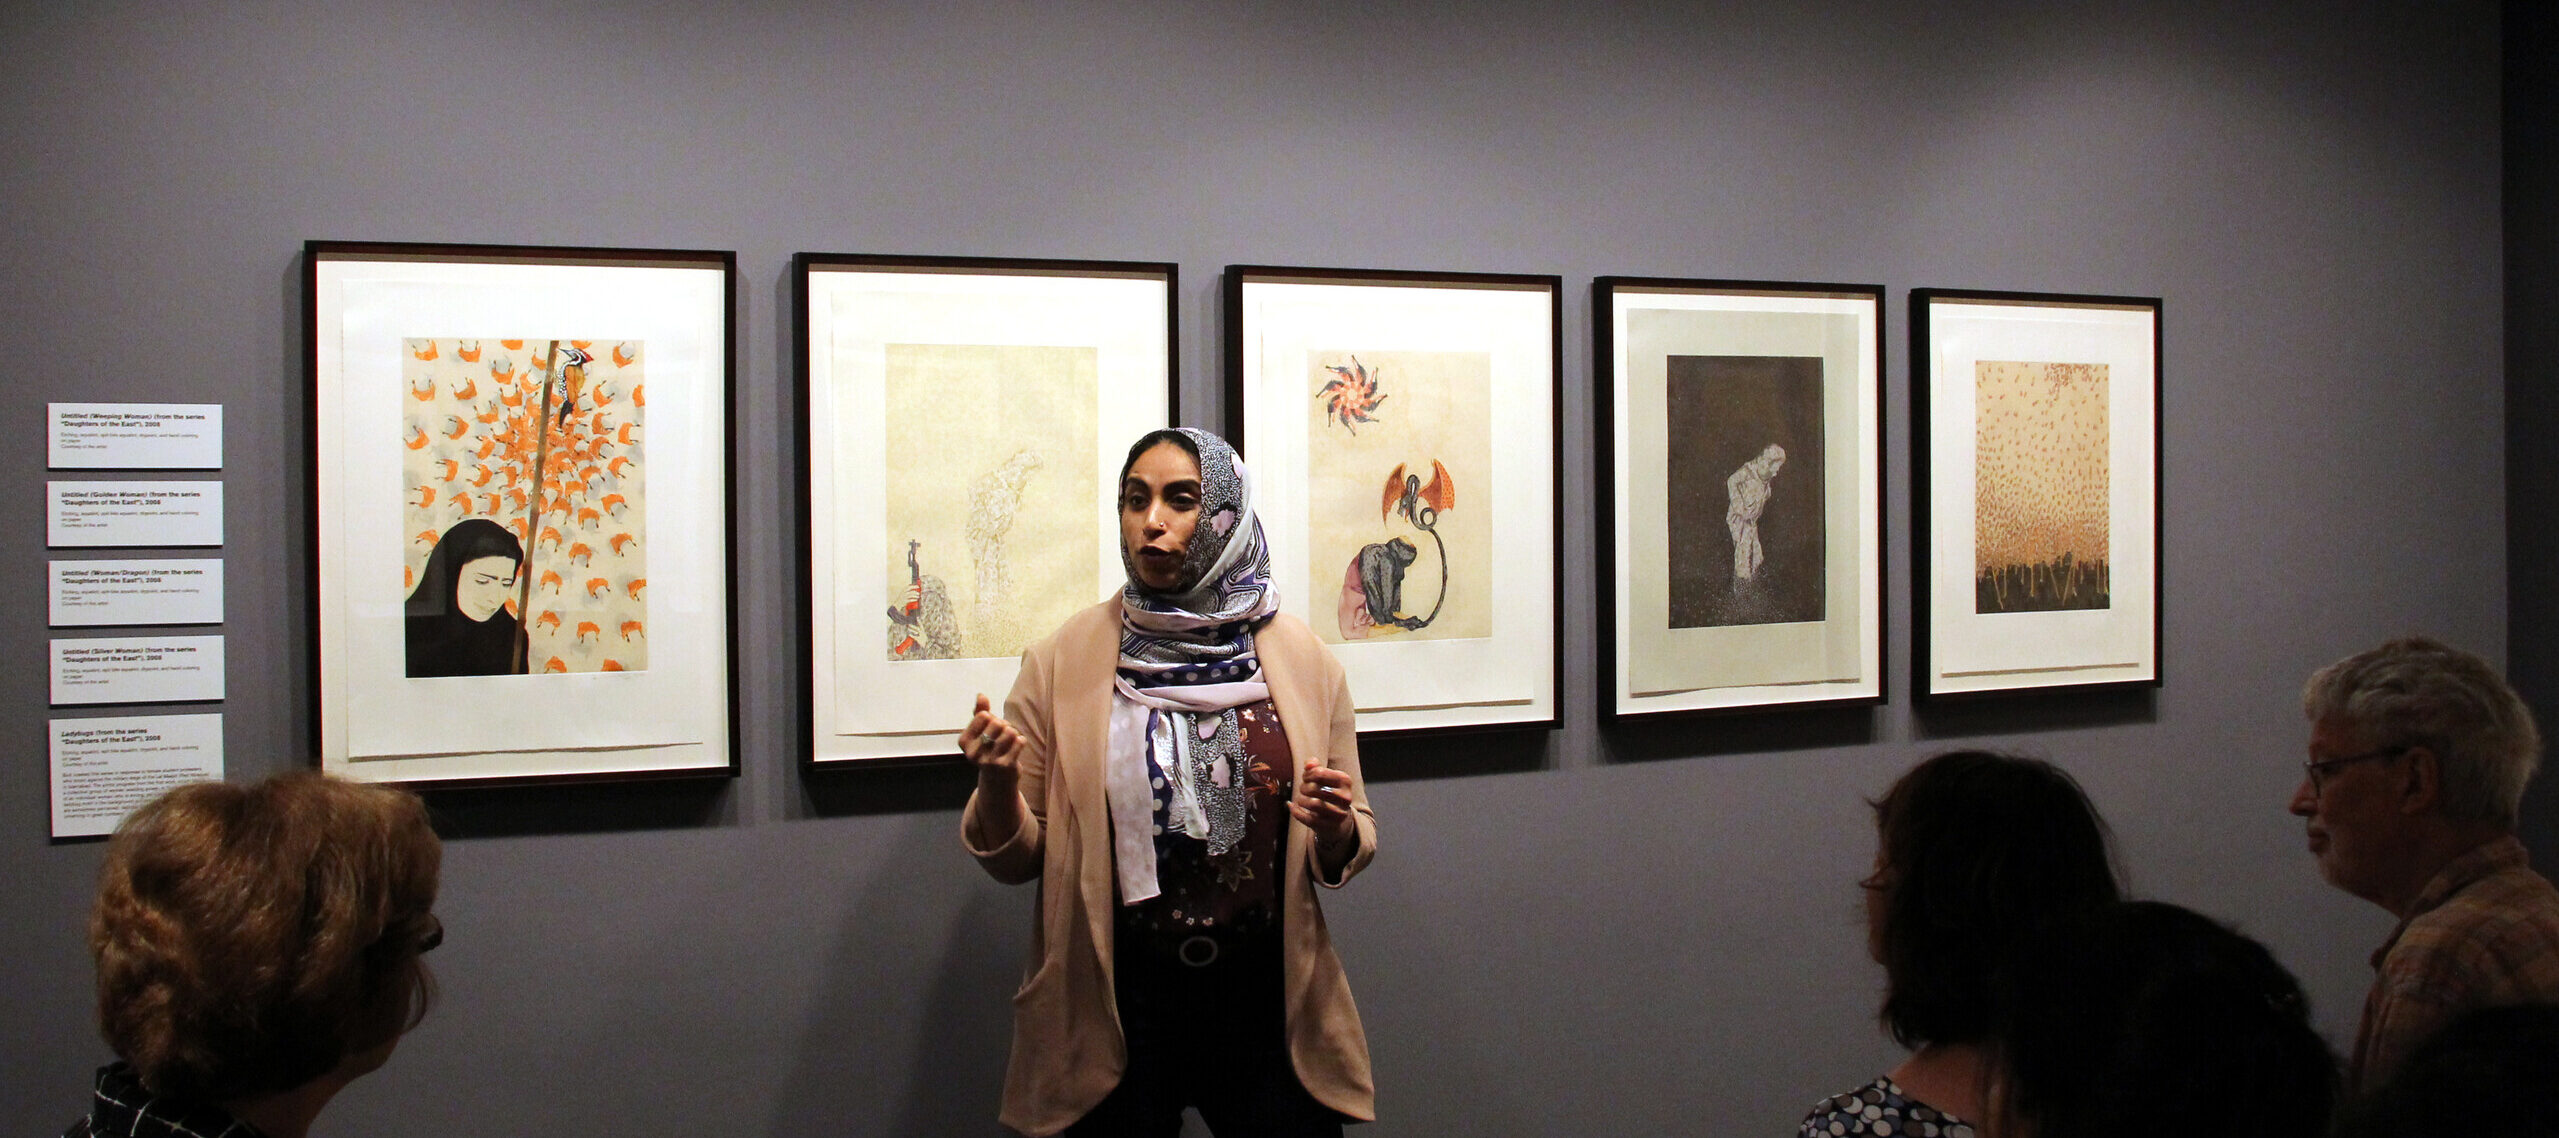 A woman with medium skin tone wearing a multicolored head scarf, beige cardigan, maroon top, and black pants stands in a gallery speaking in front of group of people sitting and listening. The speaker is the artist gesturing while speaking in front of five intricate, detailed prints.